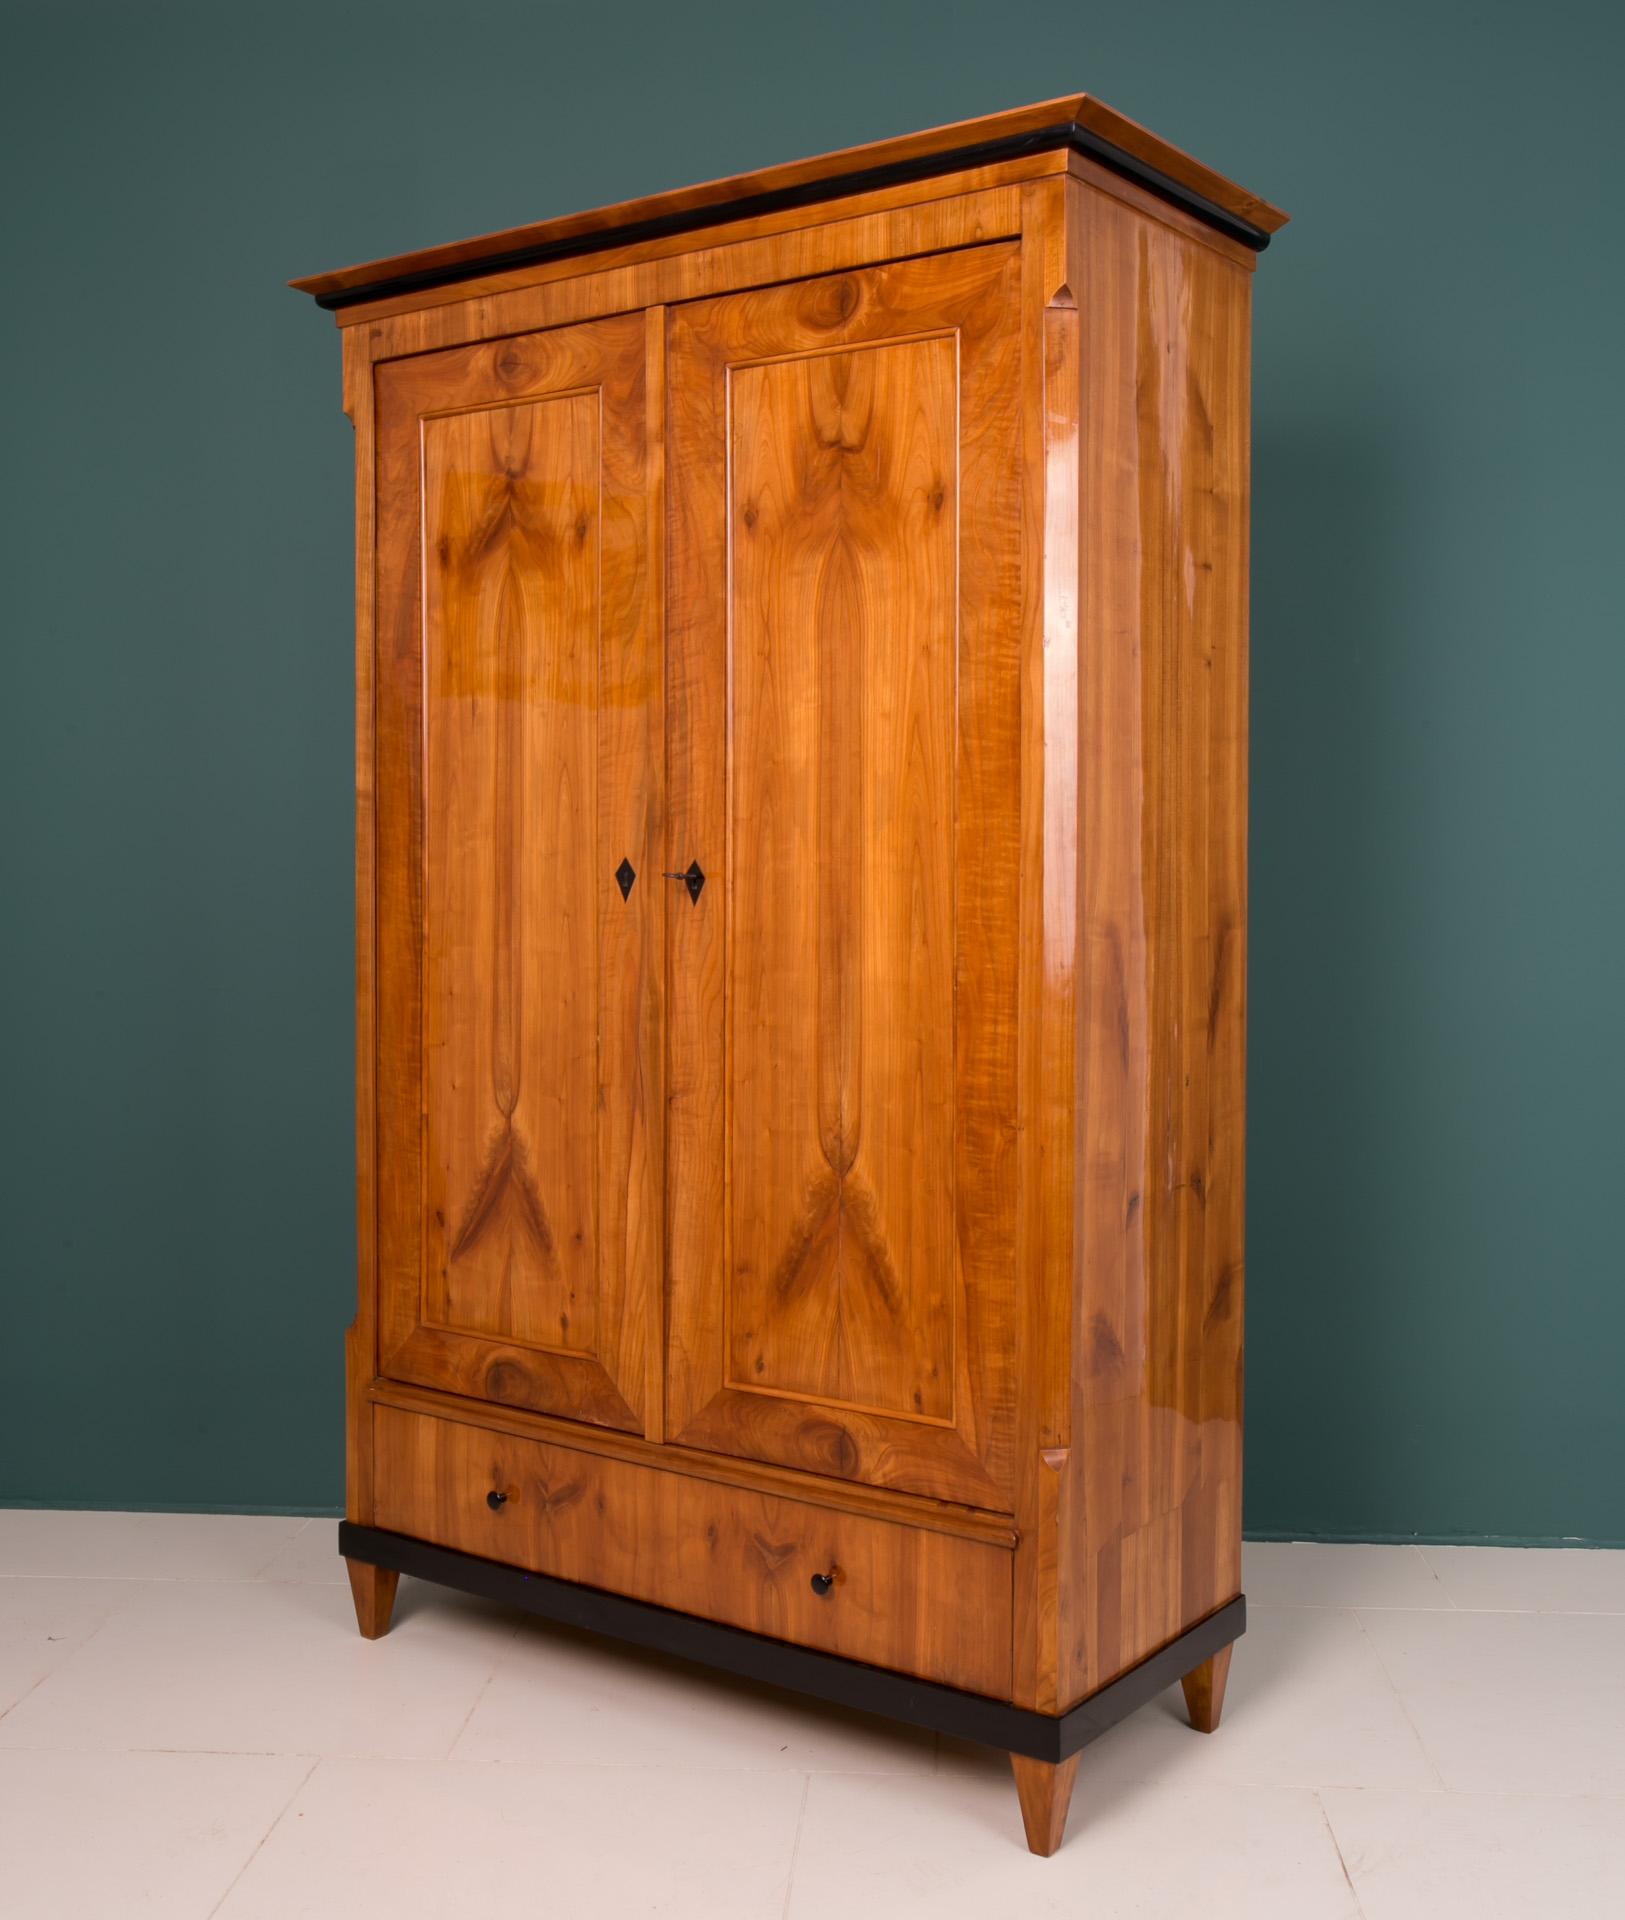 This Biedermeier wardrobe was made in Germany in first half of the 19th century. The piece is veneered with beautiful cherry wood veneer. It features one main storage section with a shelf and a hanging bar plus a practical drawer in the bottom.